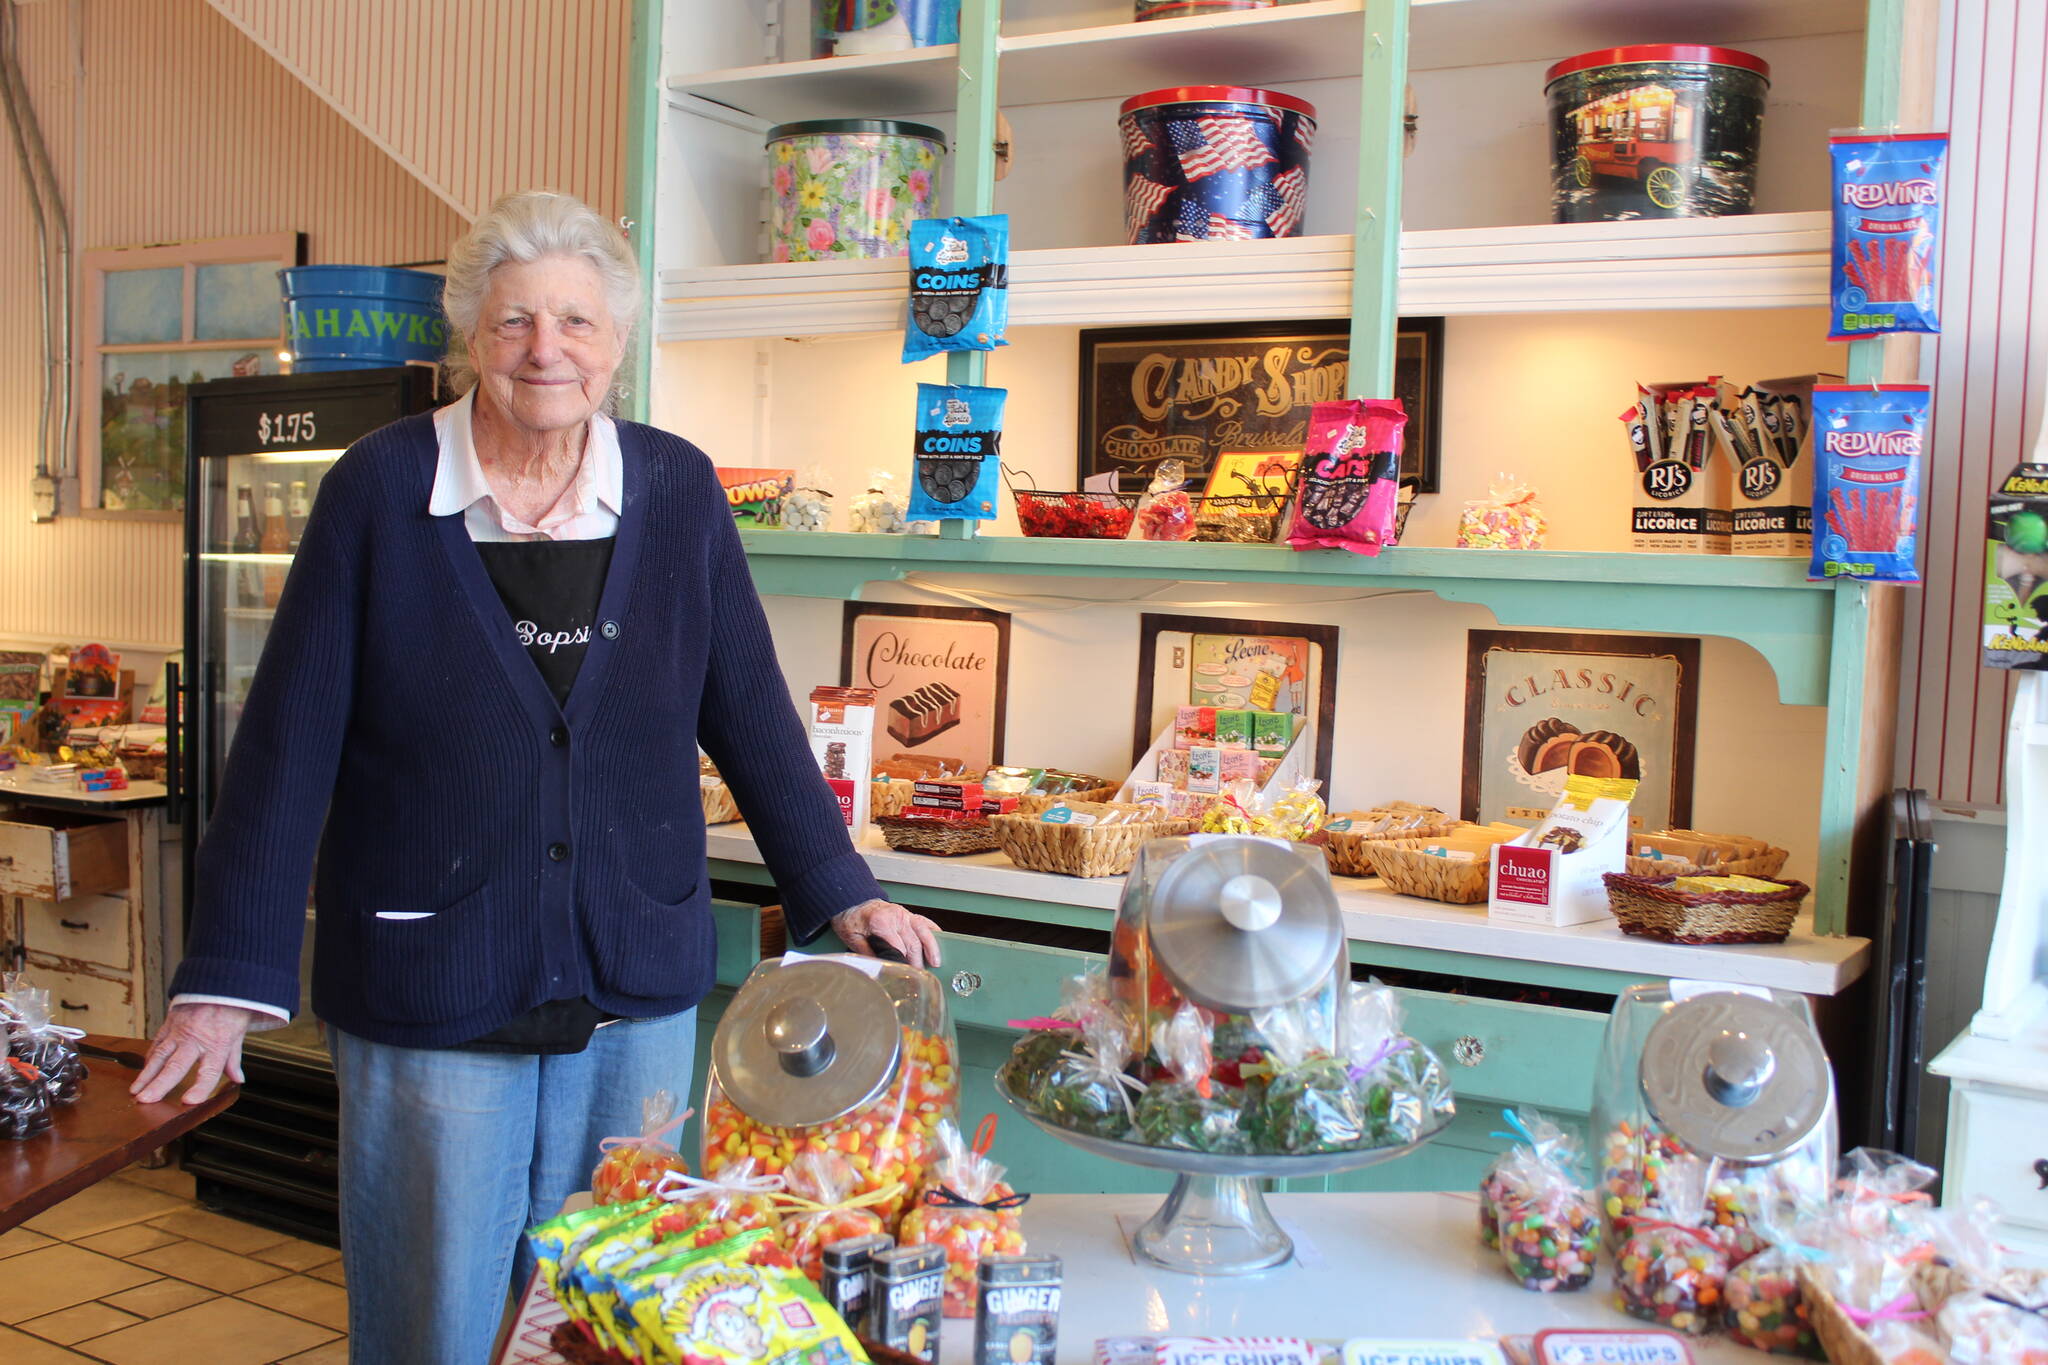 Photo by Karina Andrew/Whidbey News-Times
Kay Coolidge has owned and run the vintage style candy shop Popsies in Oak Harbor for the last 15 years.